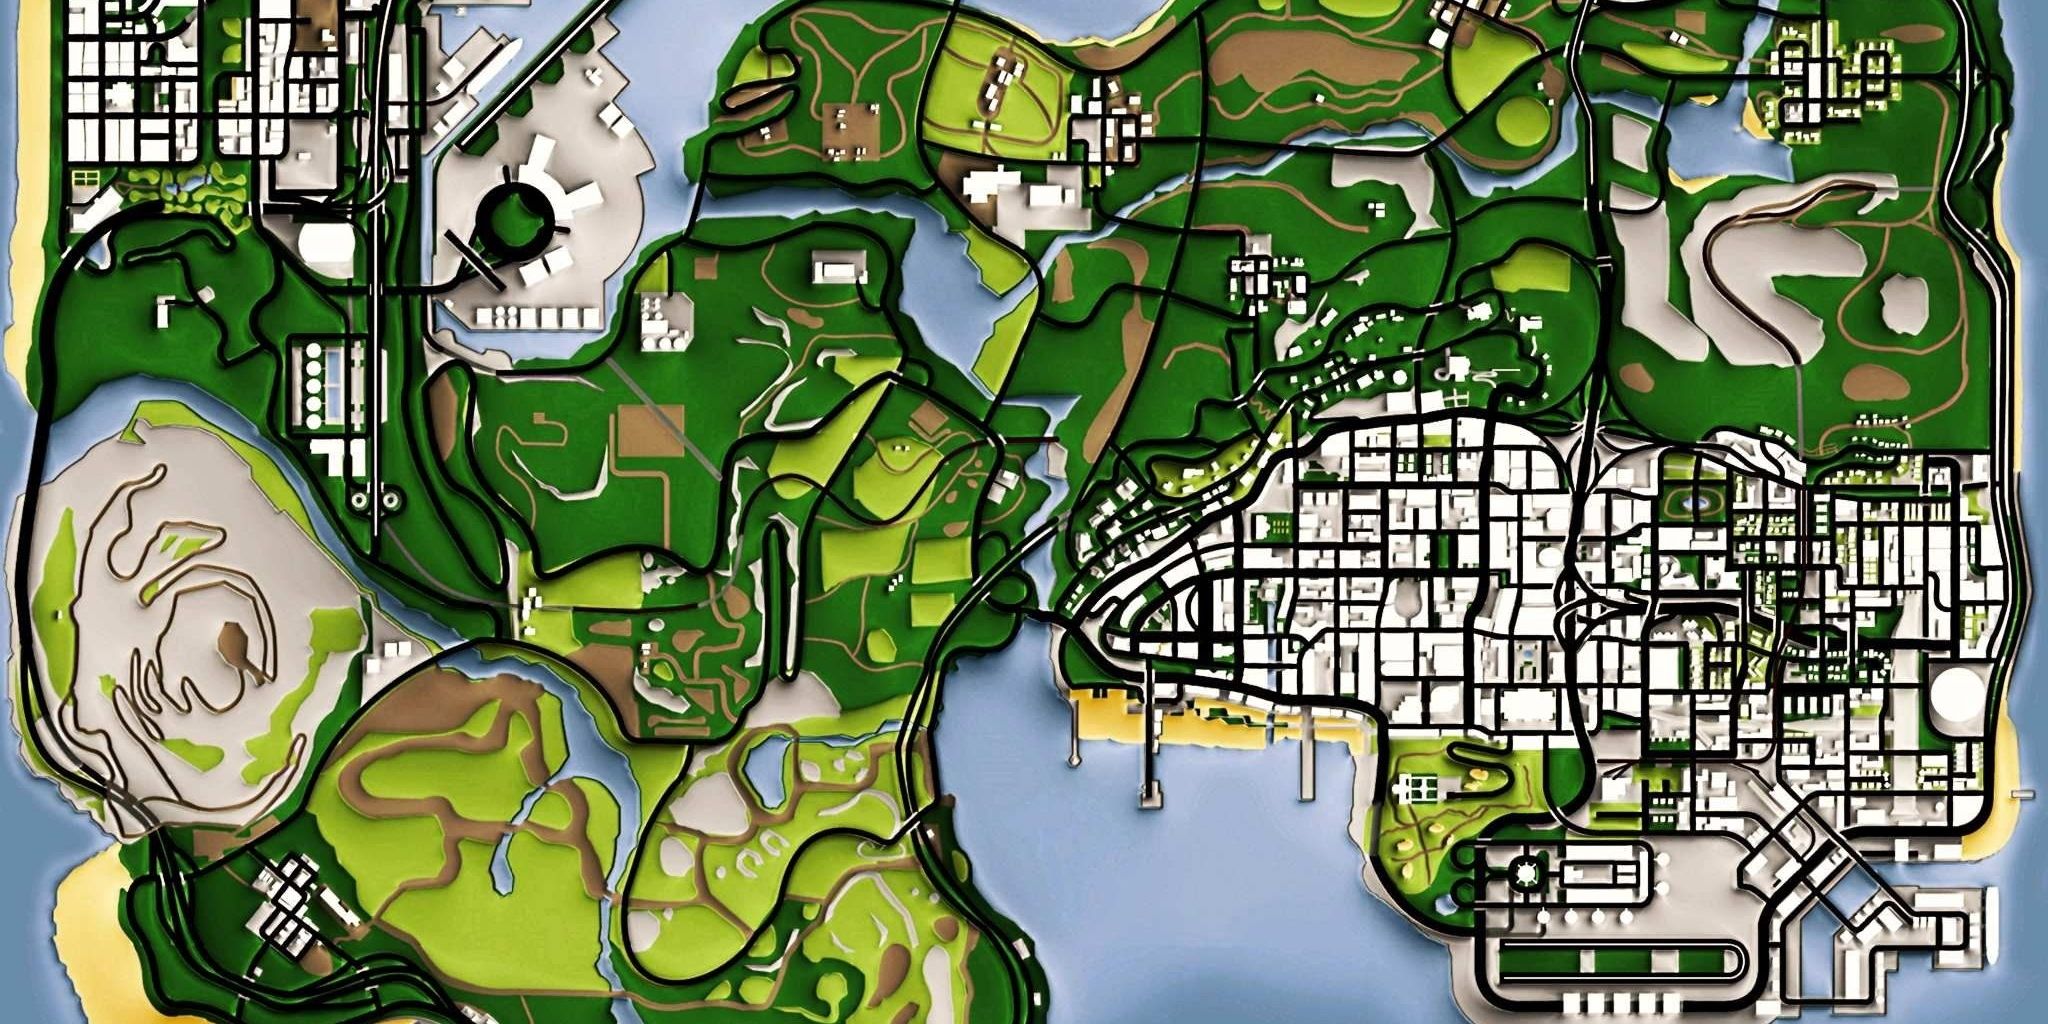 red county san andreas